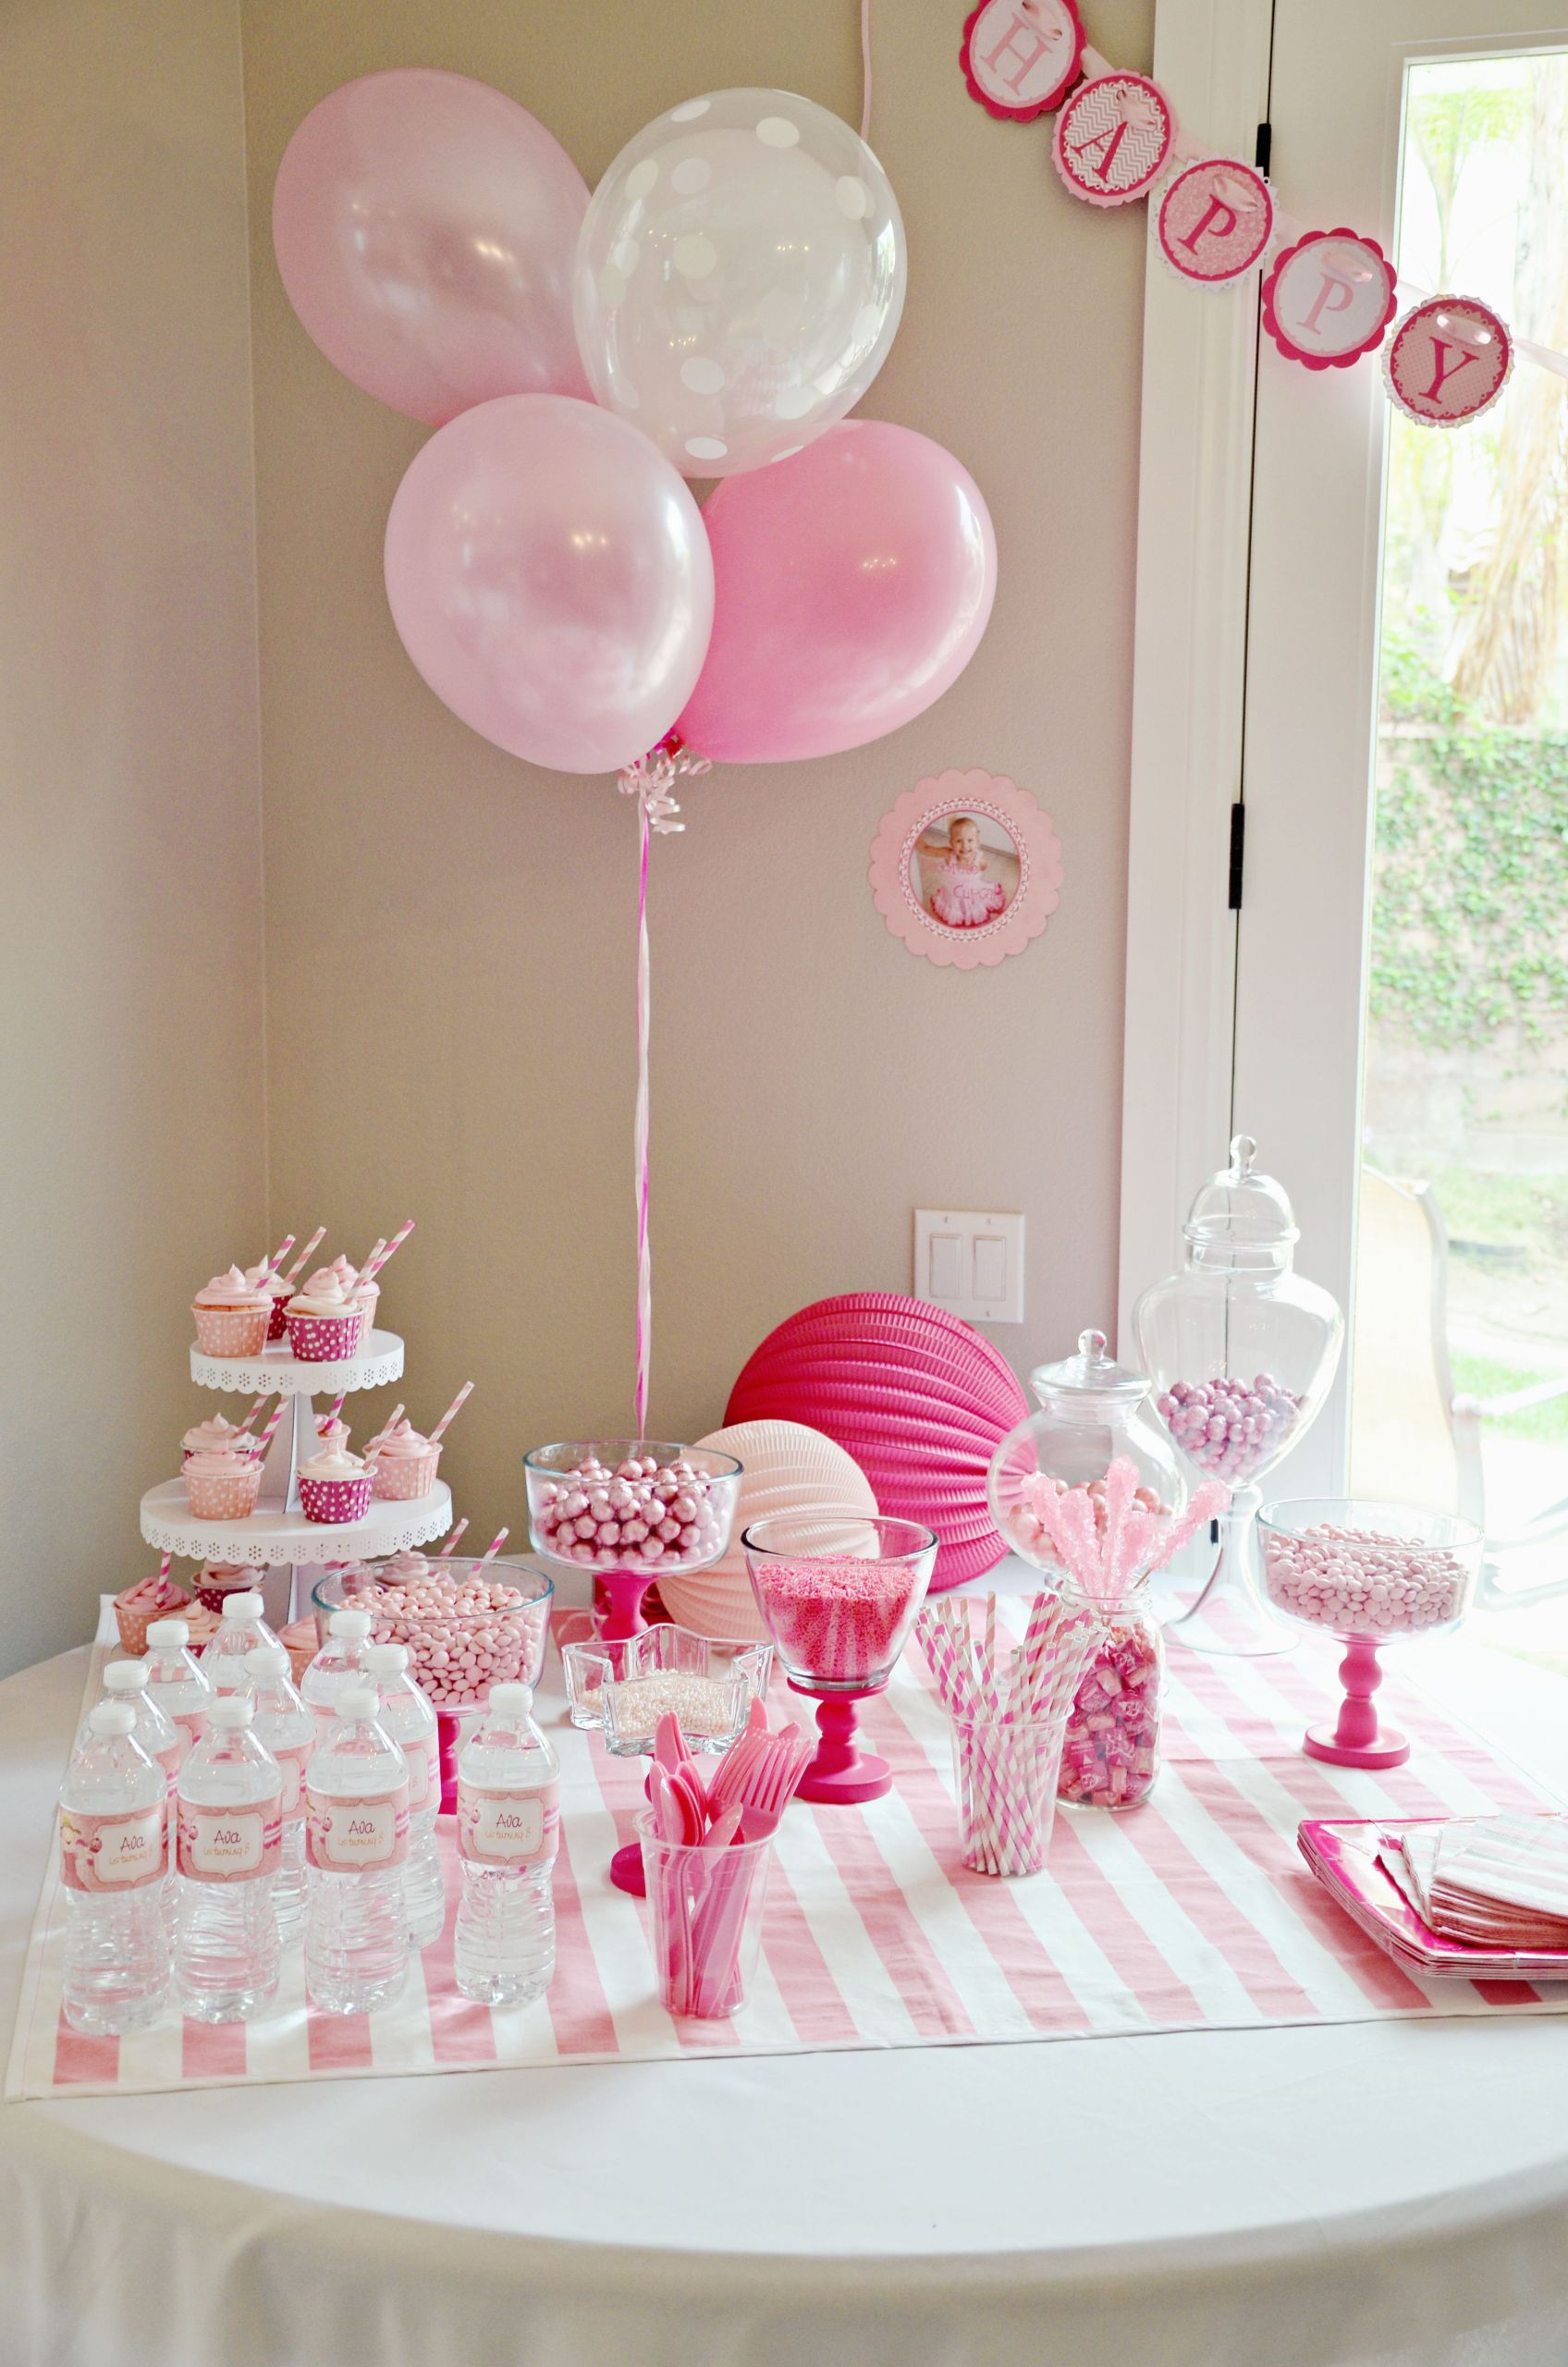 Party Ideas For 1 Year Old Baby Girl
 A Pinkalicious themed party for a 3 year old